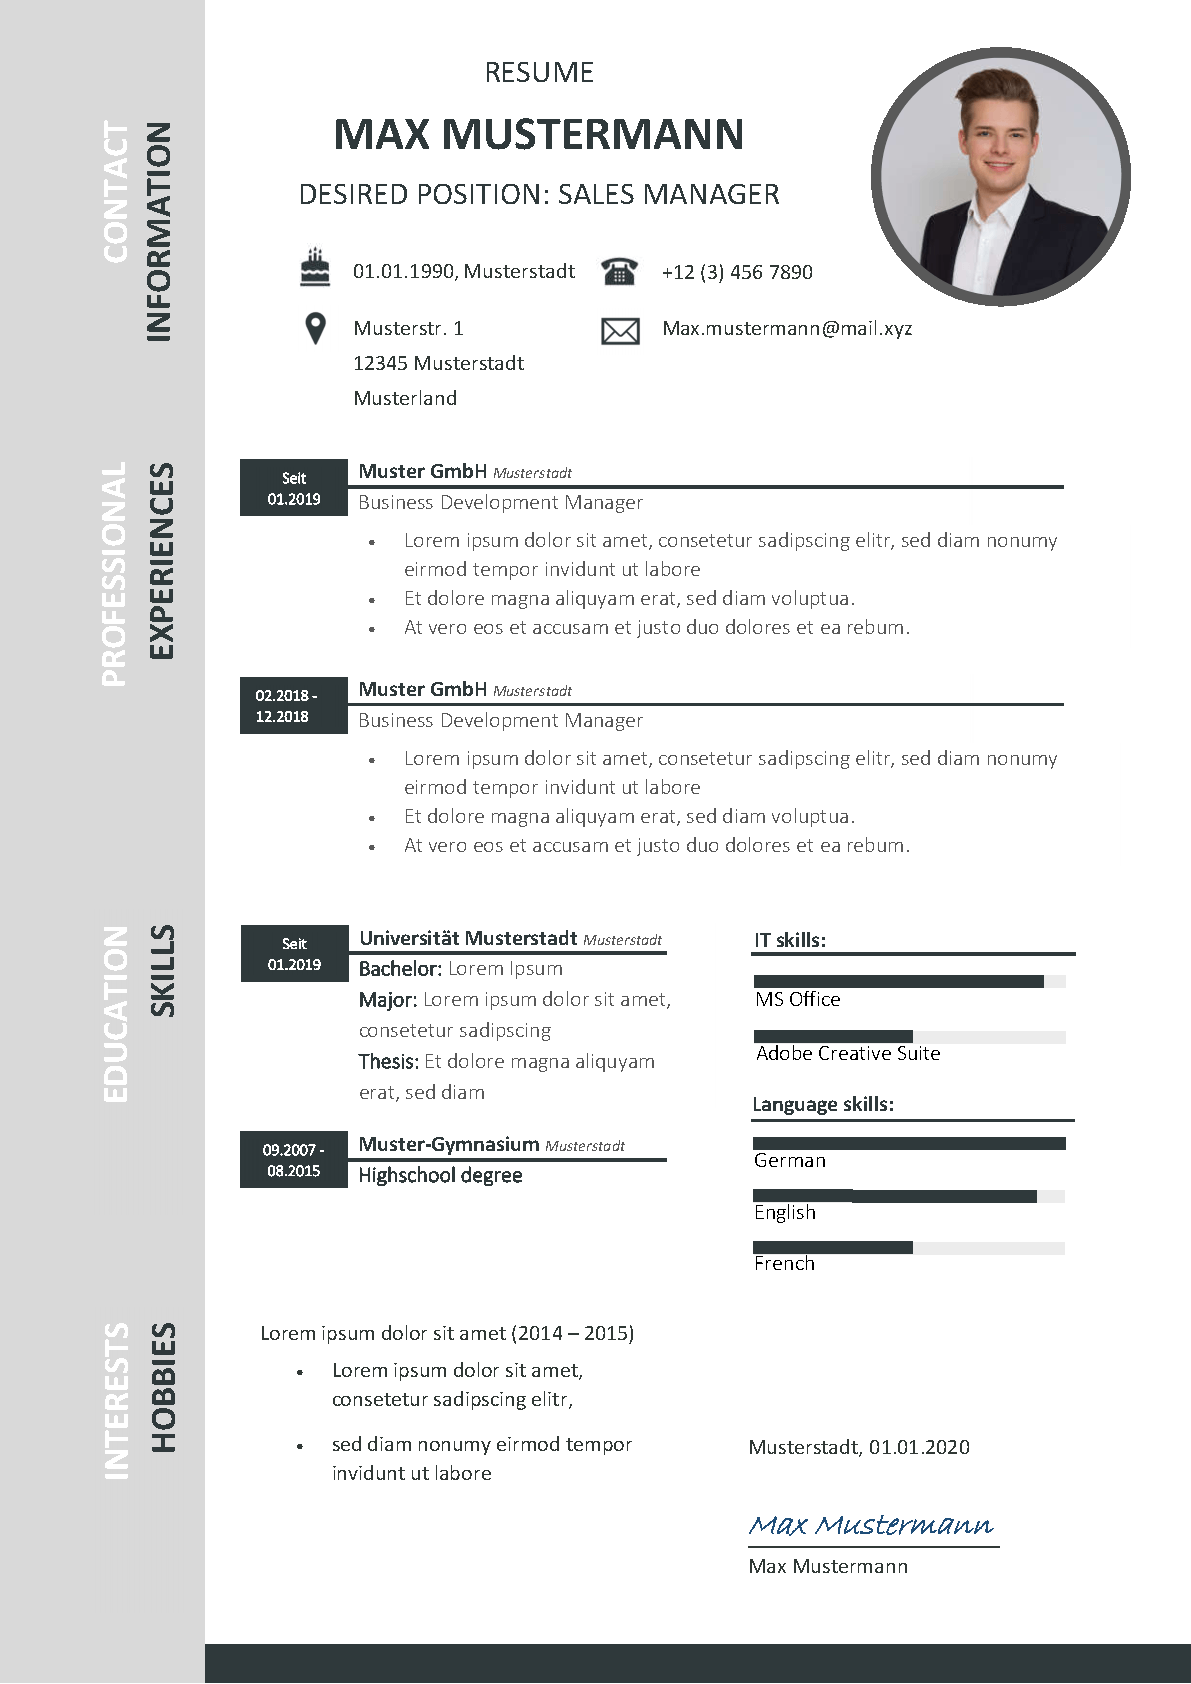 How To Make A Cv In German